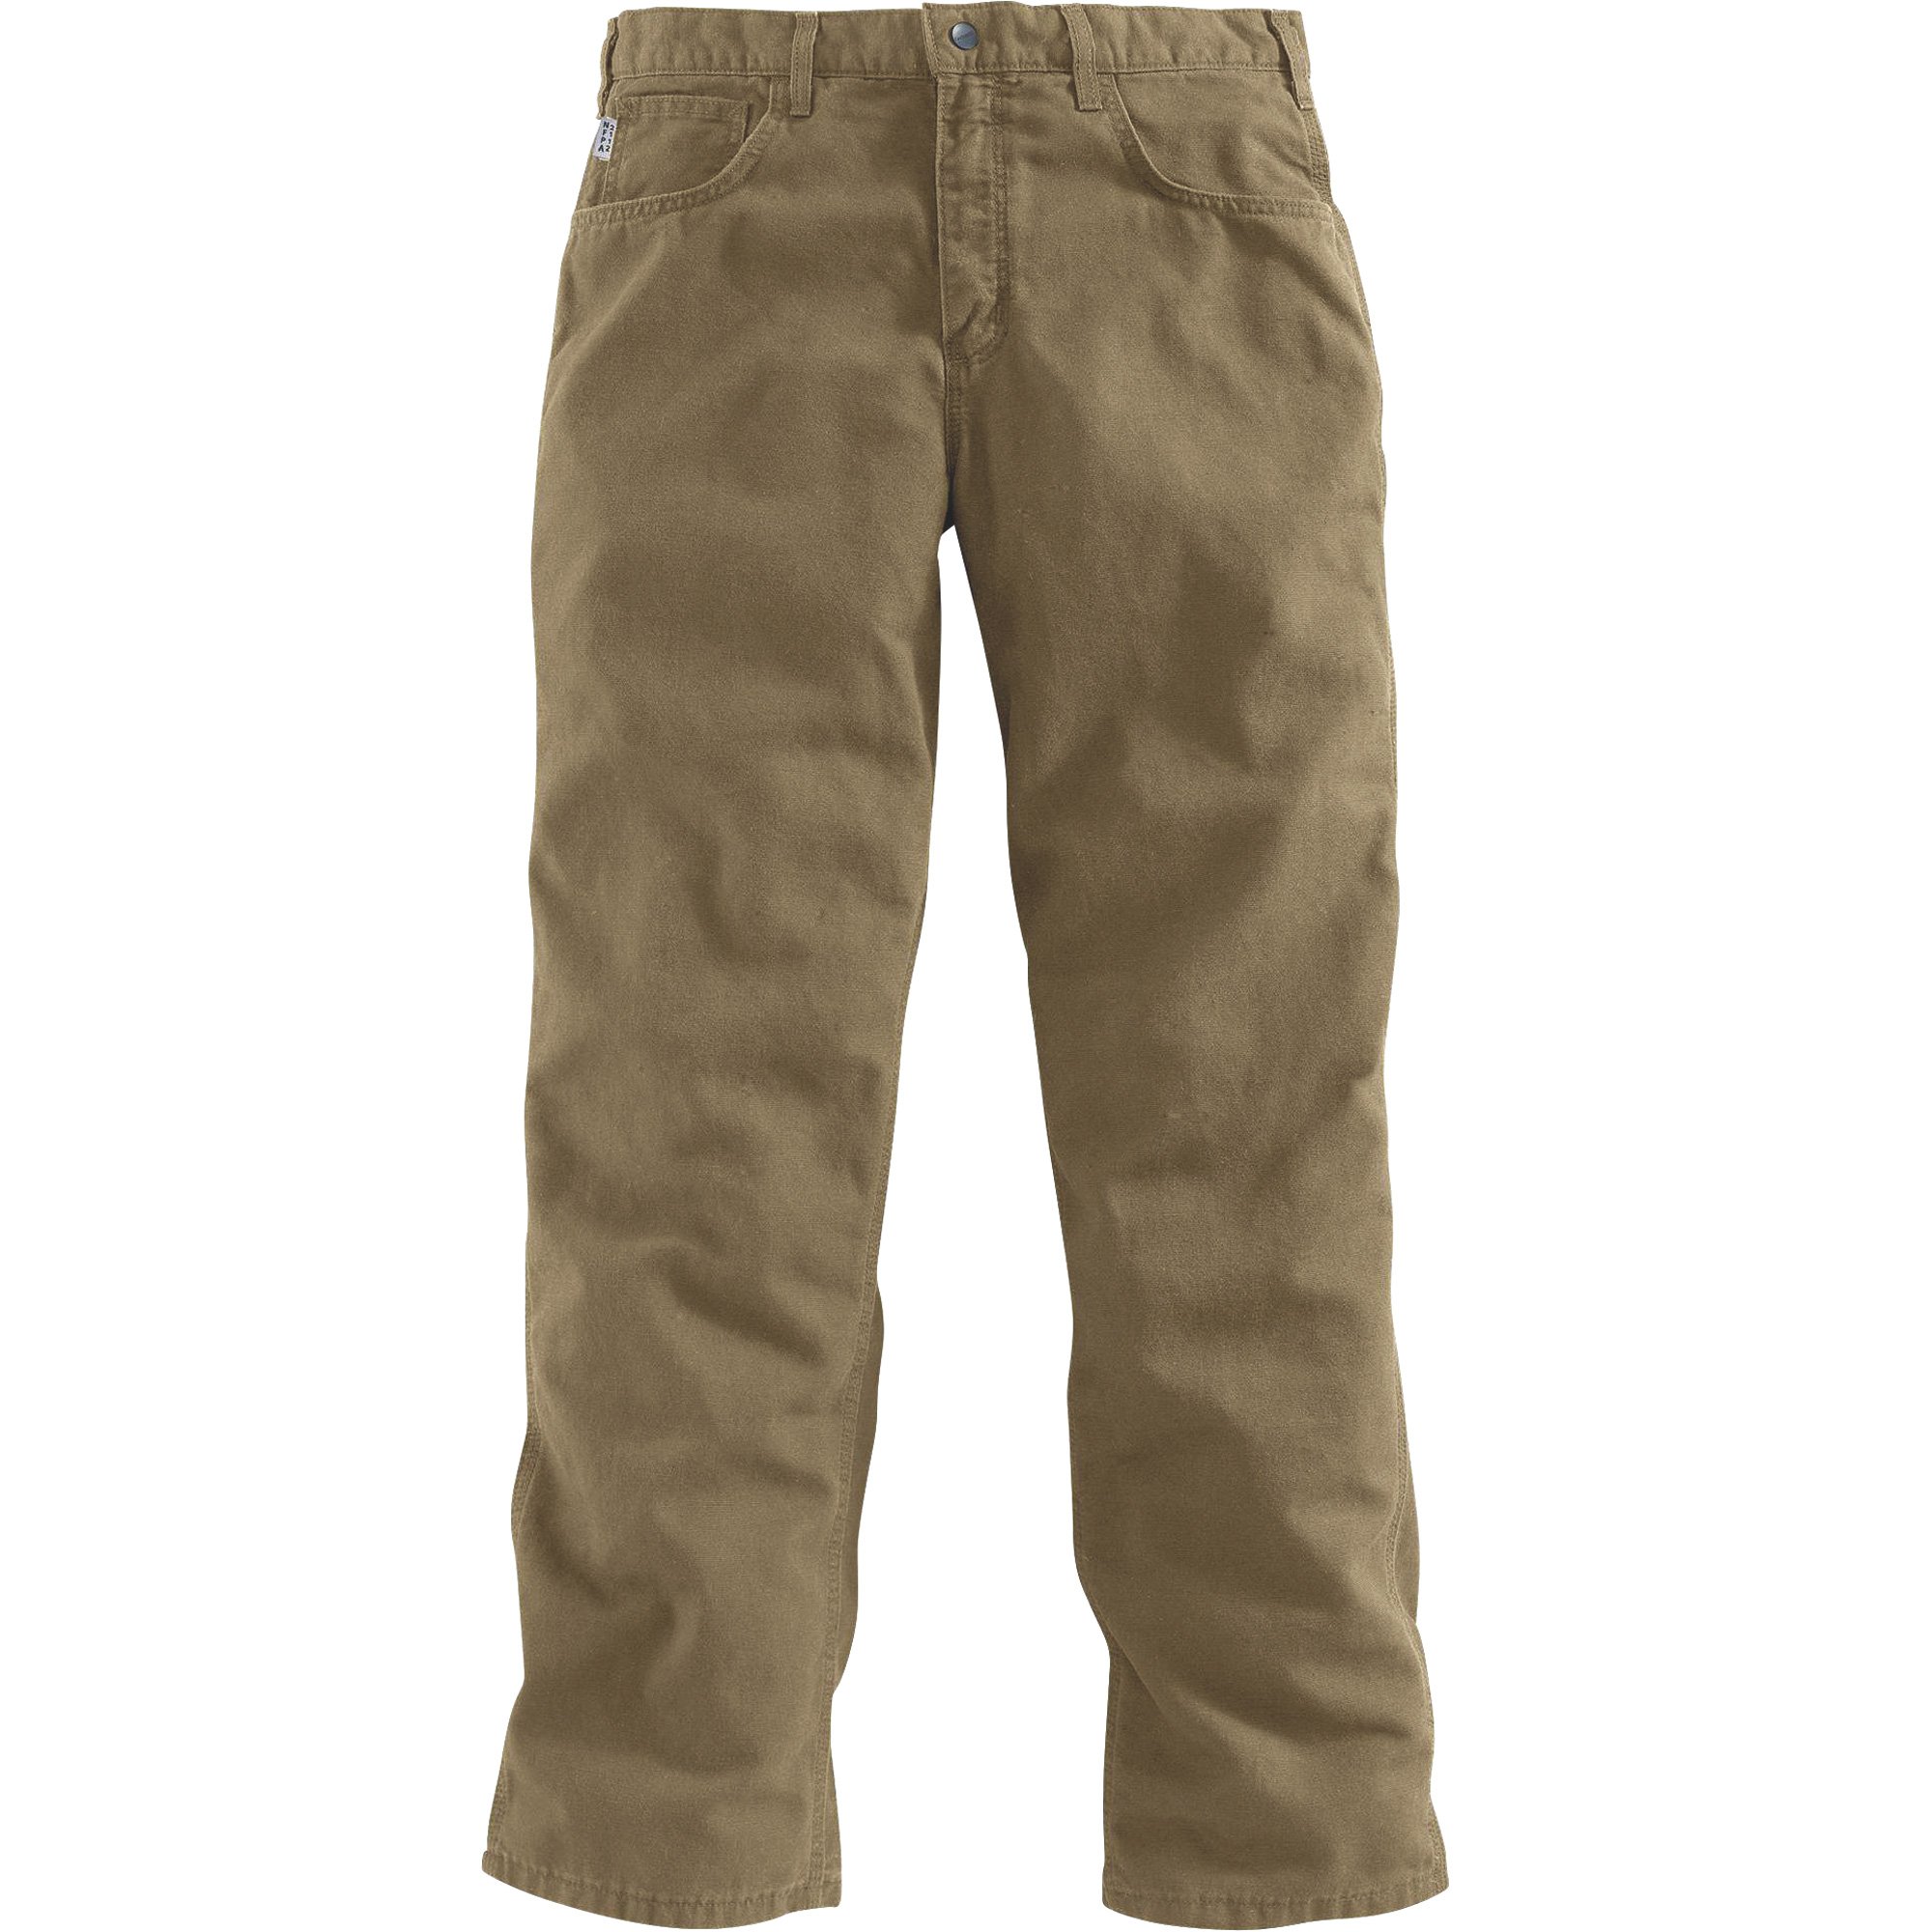 Carhartt Men's Flame-Resistant, Relaxed Fit, Midweight Canvas